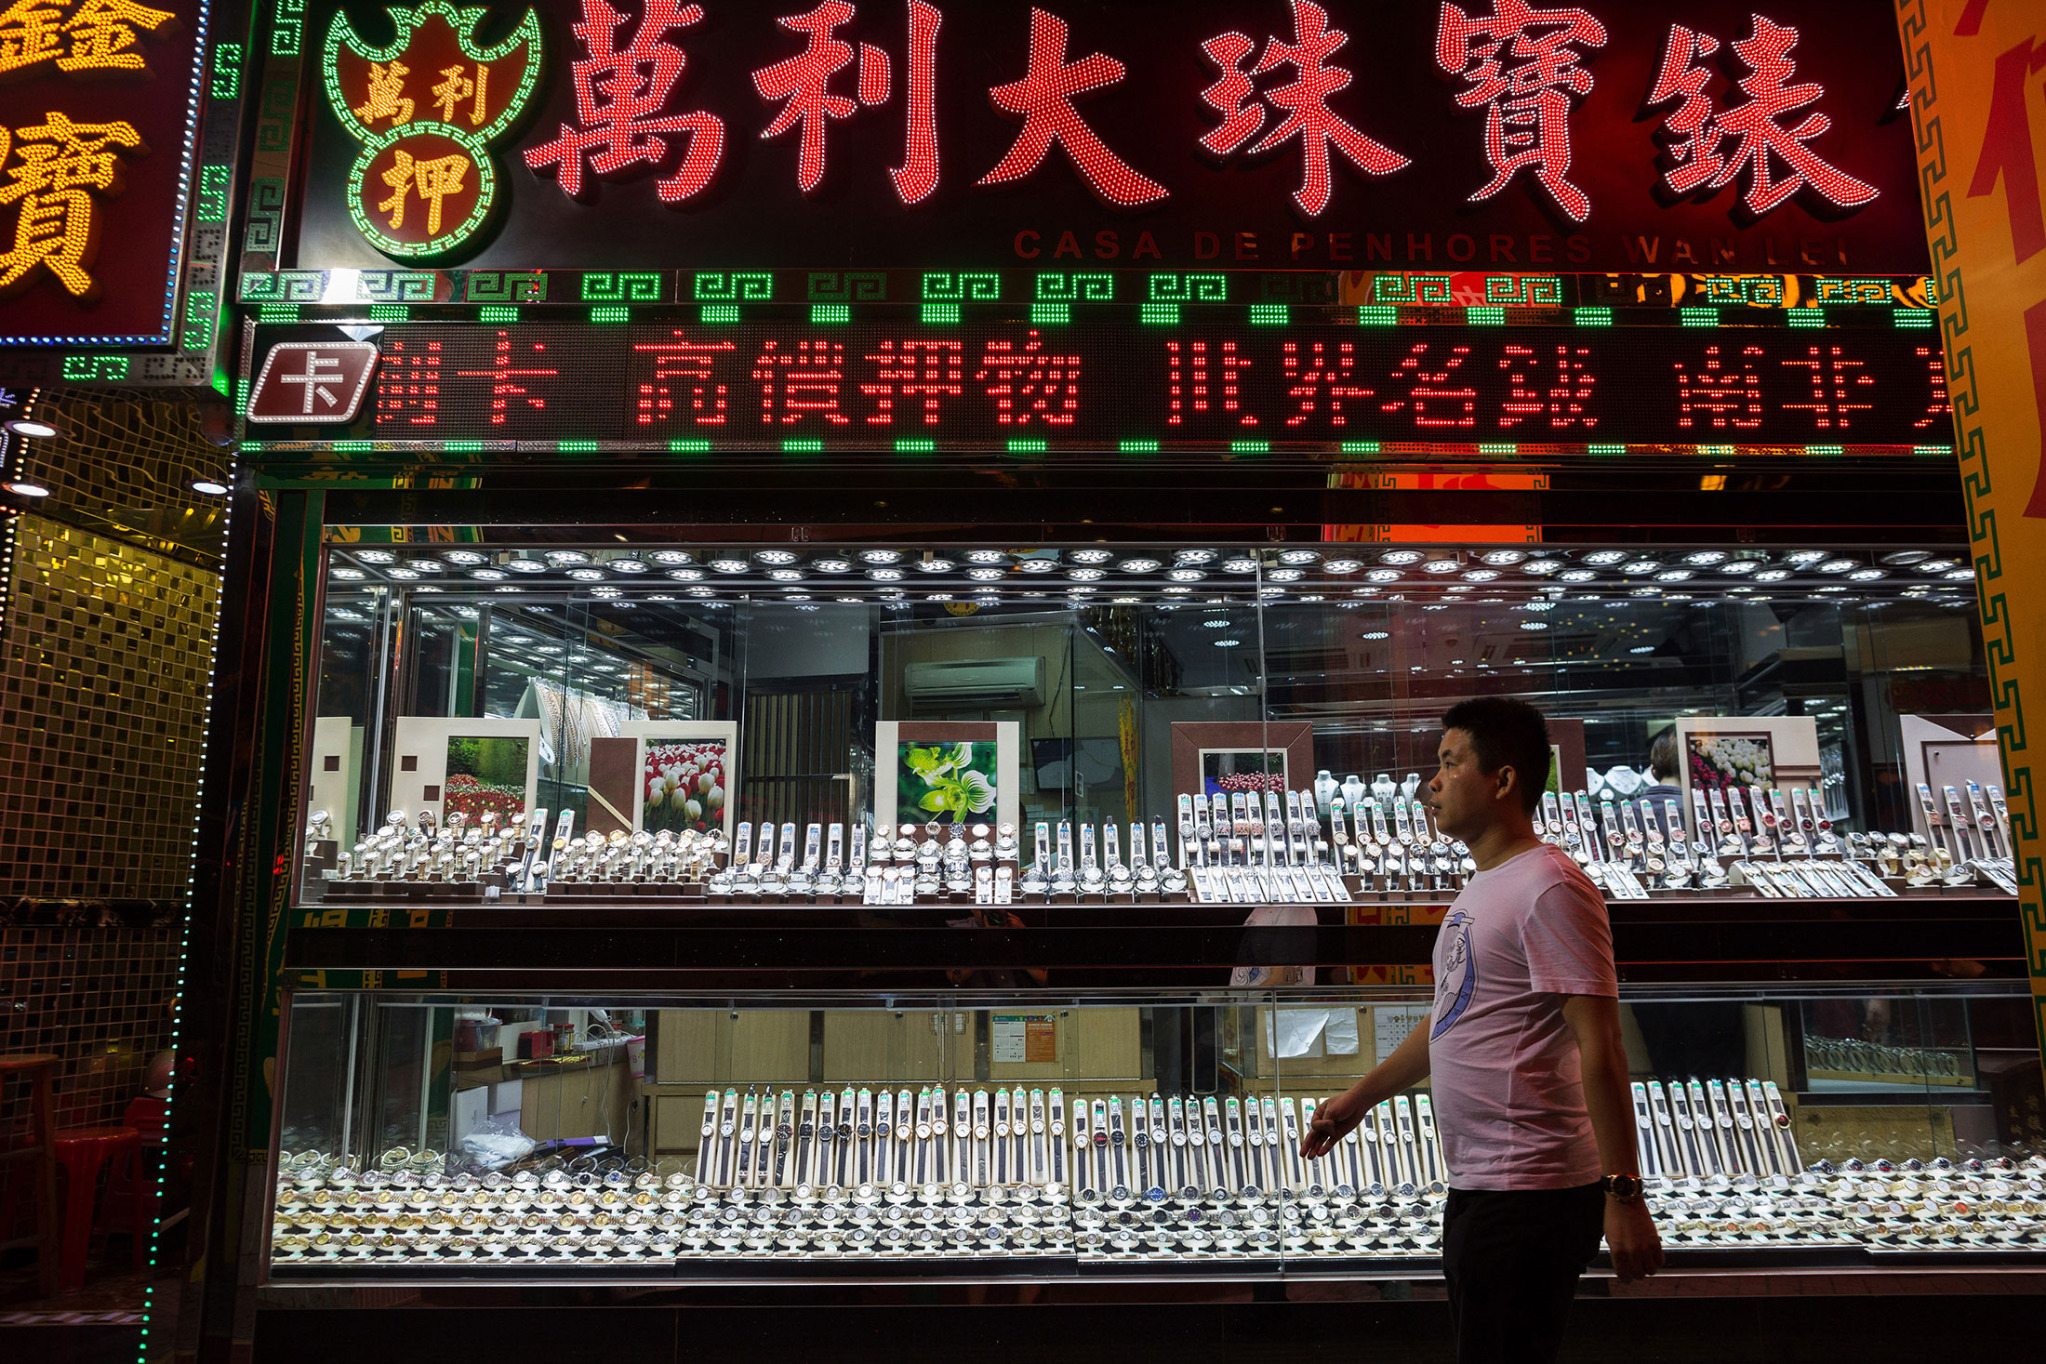 A pedestrian walks past watches on display in a store window in Macau, on Aug. 29.
